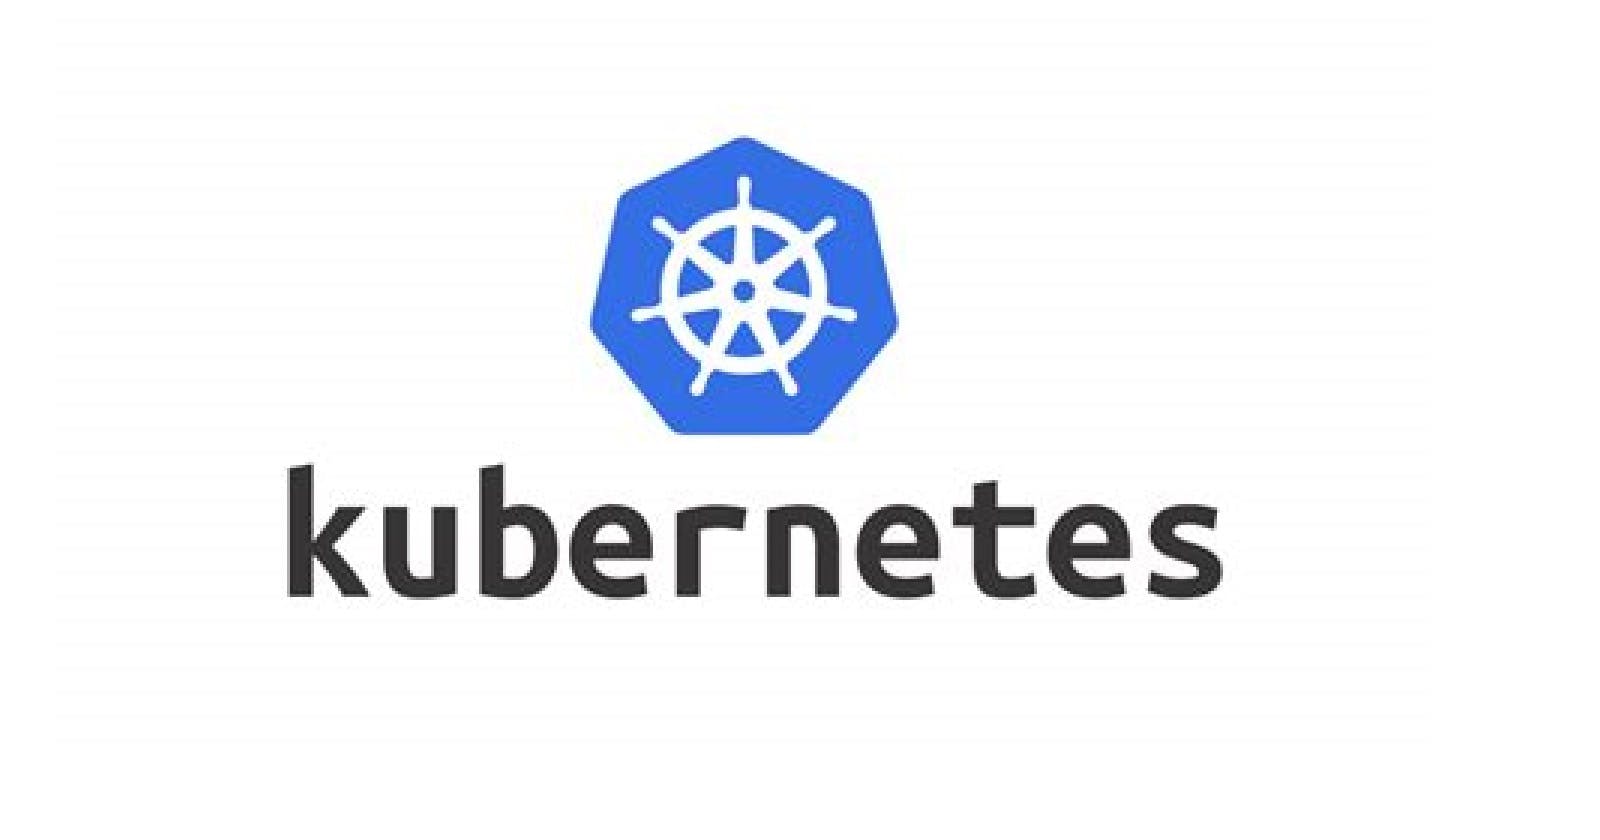 A Simple Guide to Kubernetes